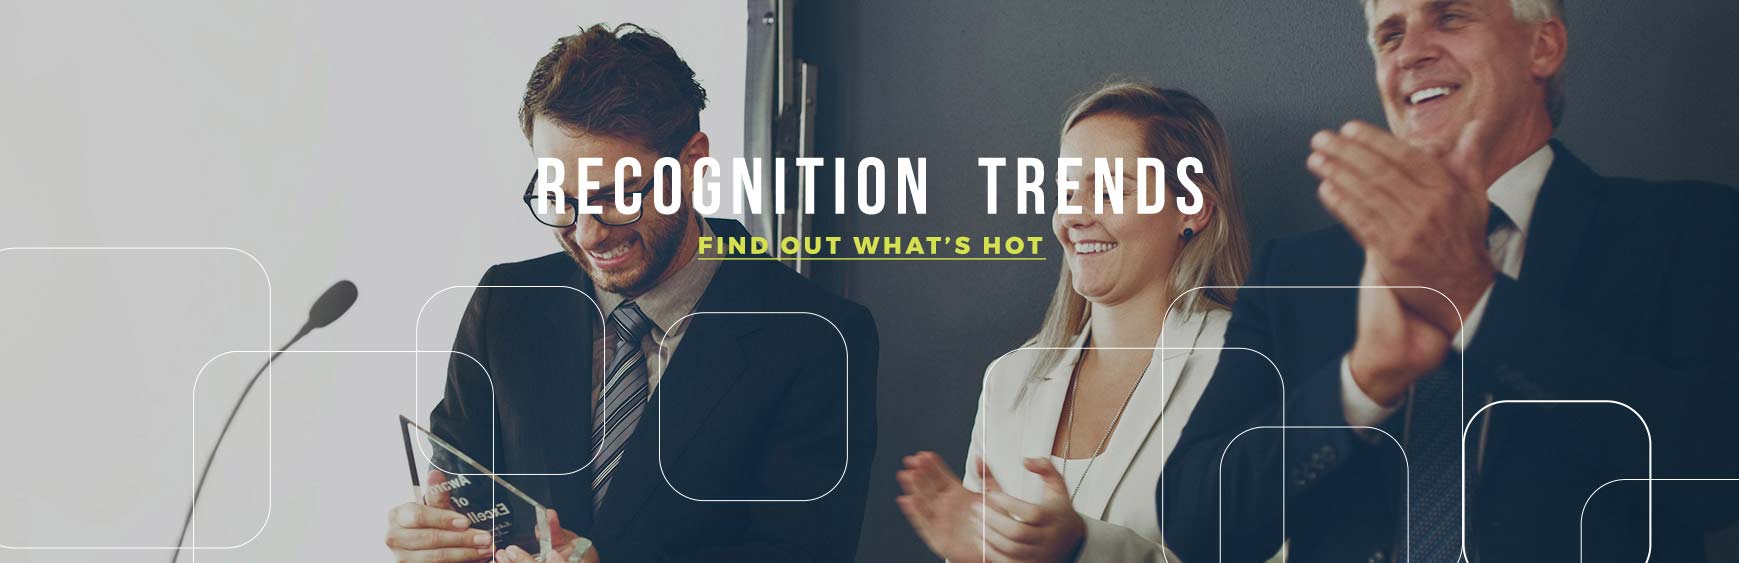 Recognition Trends